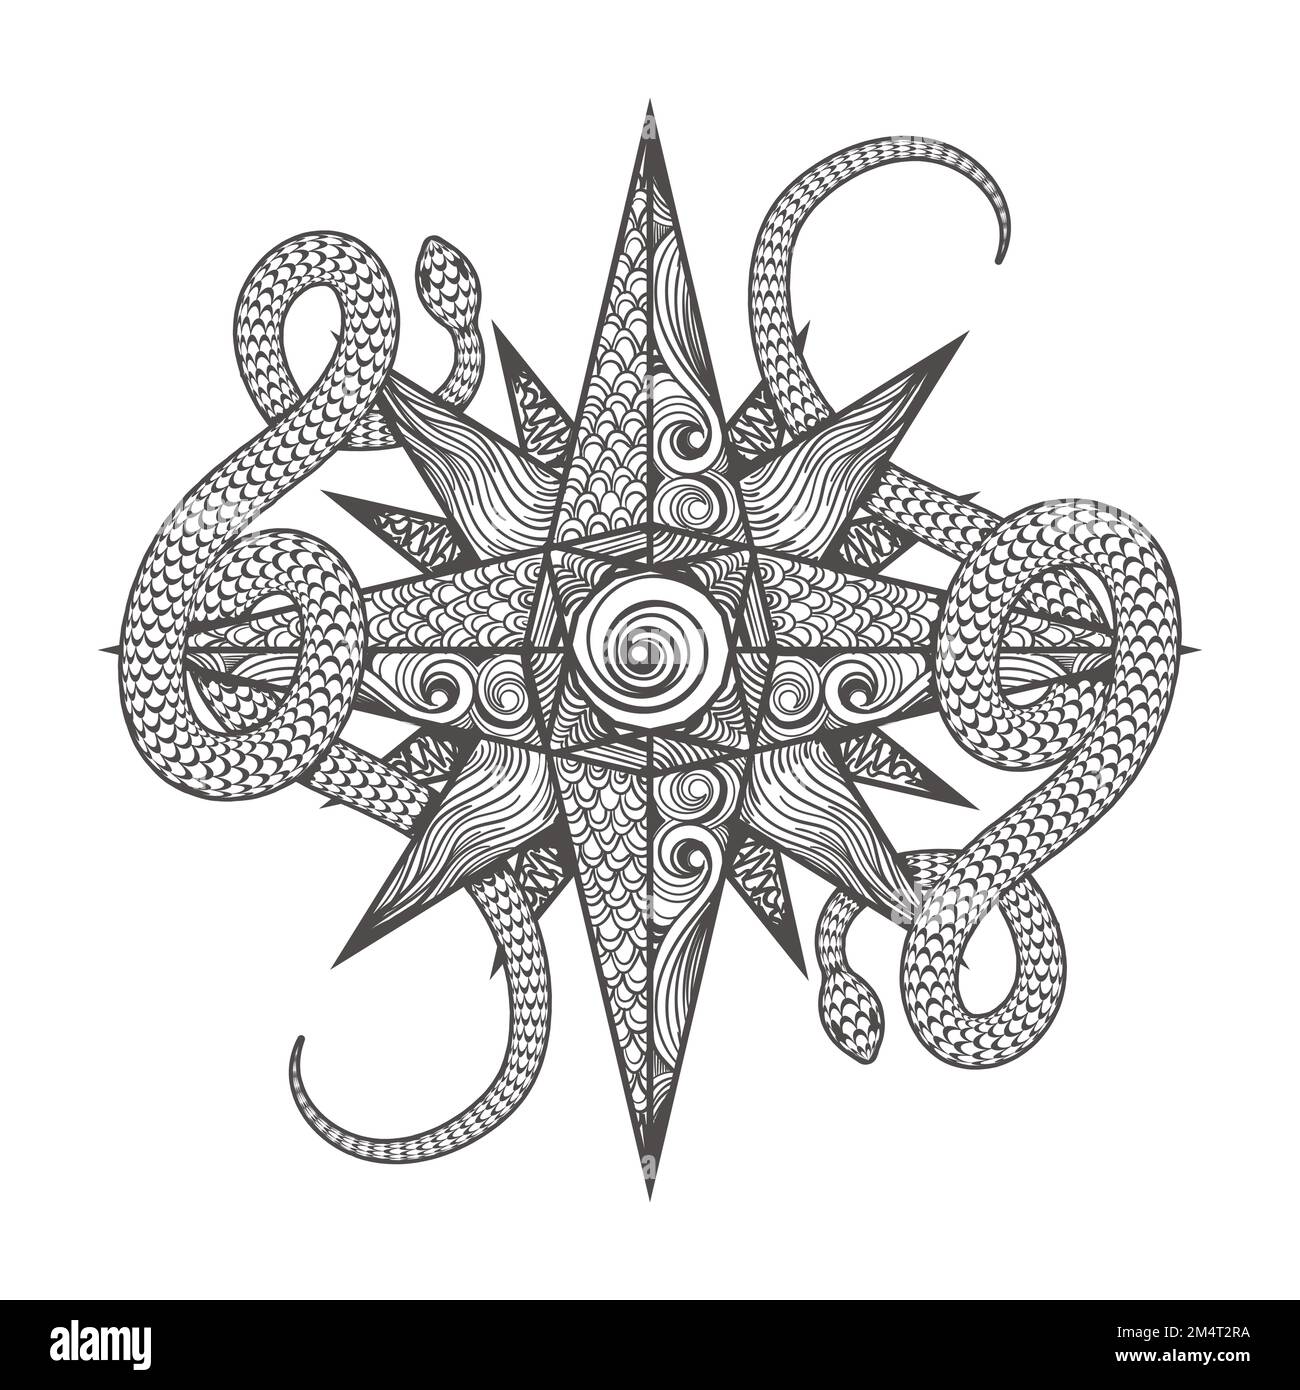 Tattoo of Star and Snakes Esoteric Emblem drawn in Zentangle Style isolated on white. Vector Illustration Stock Vector